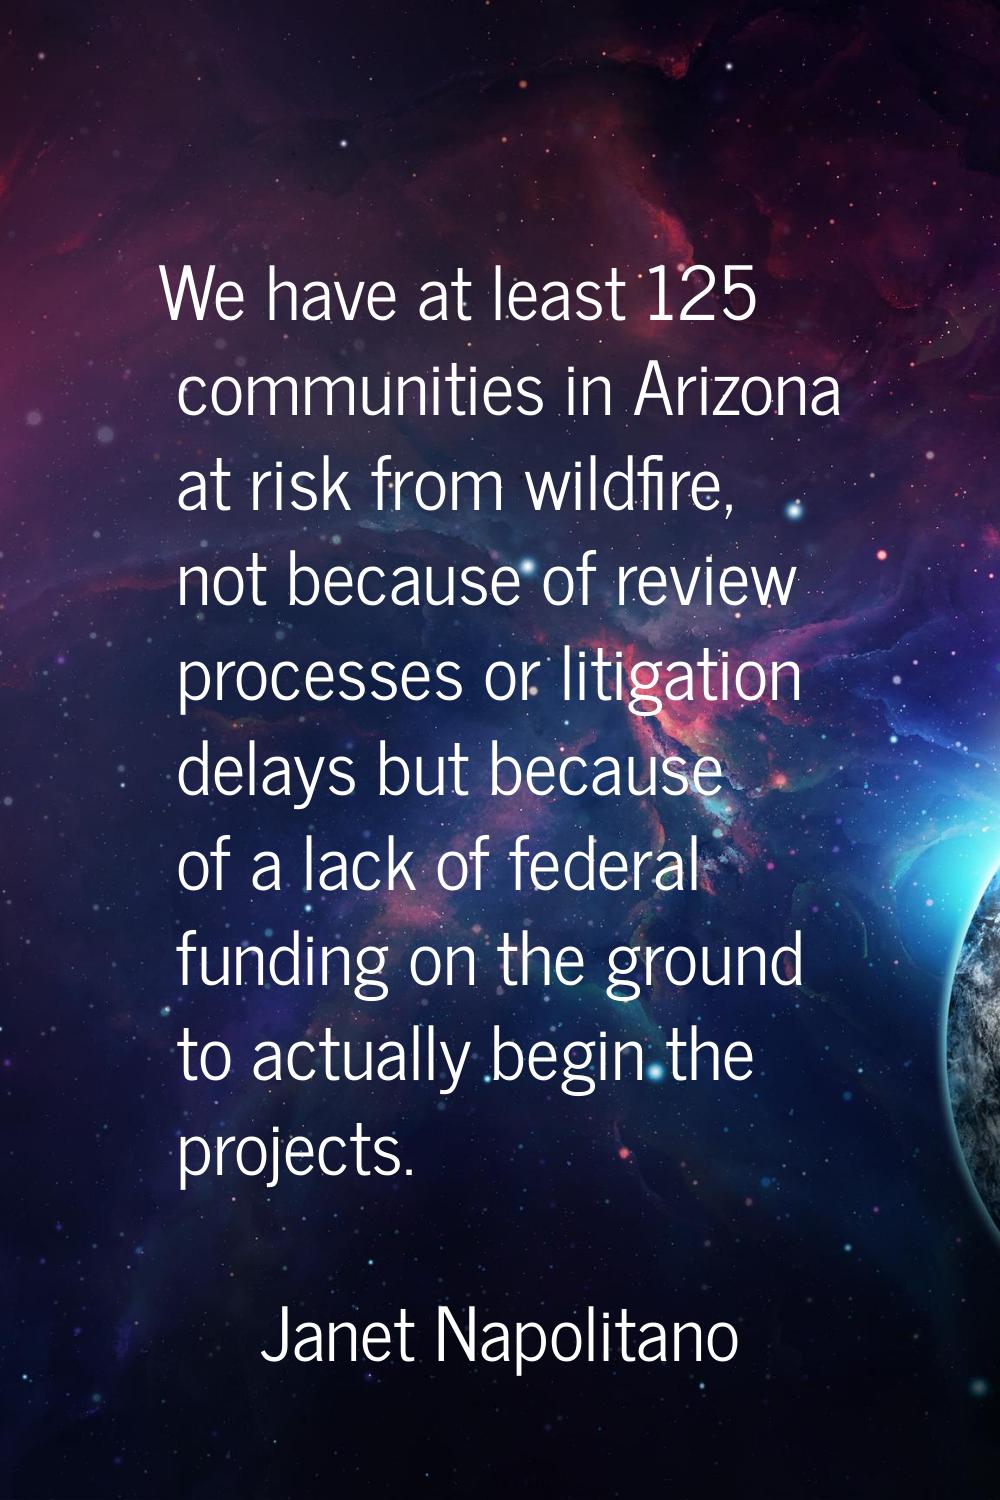 We have at least 125 communities in Arizona at risk from wildfire, not because of review processes 